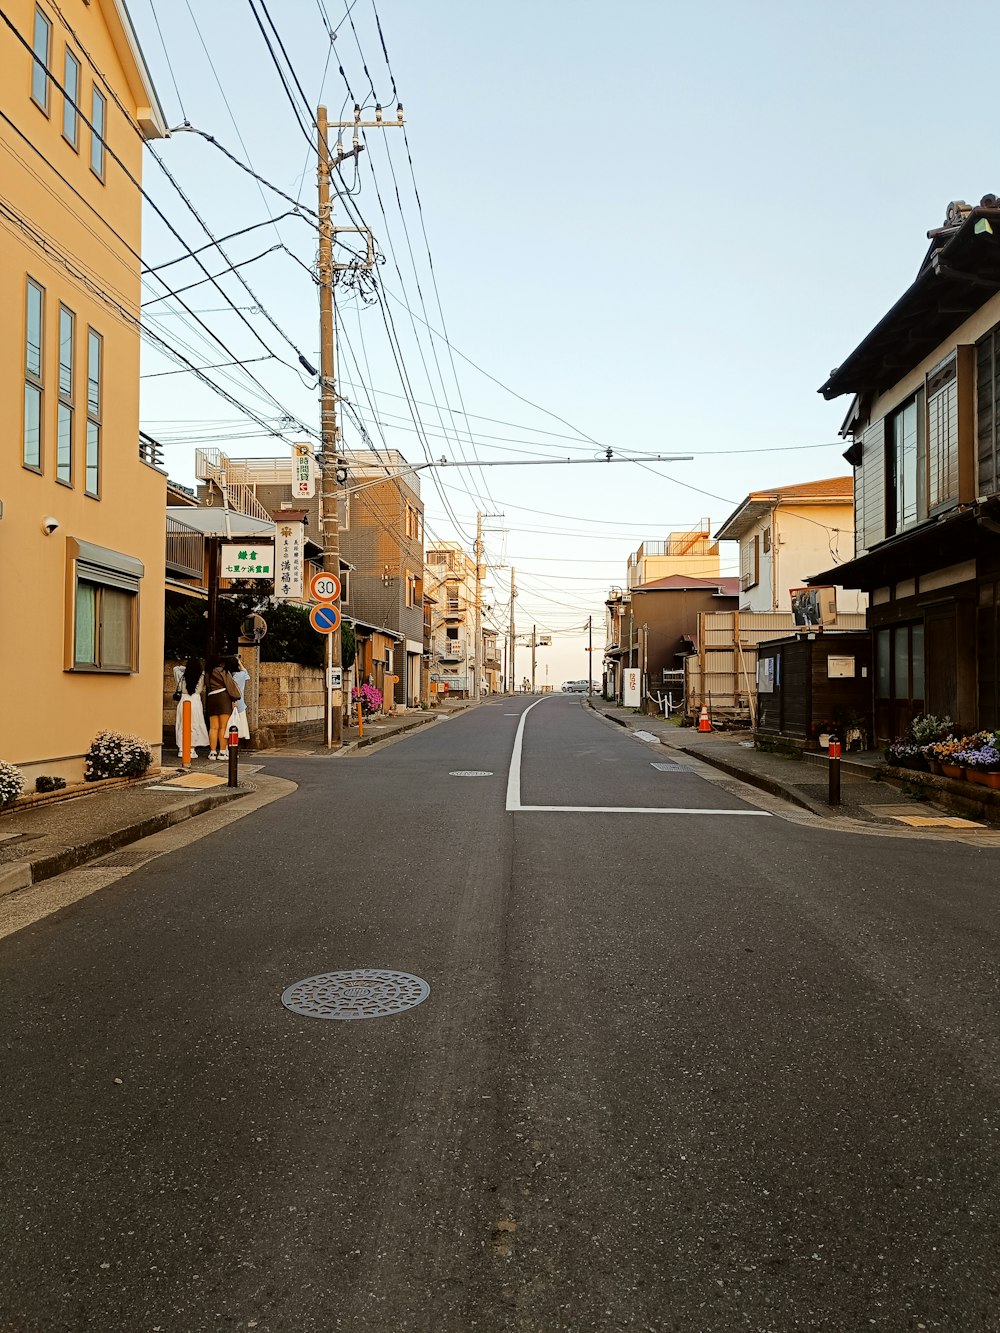 an empty street with houses and power lines in the background